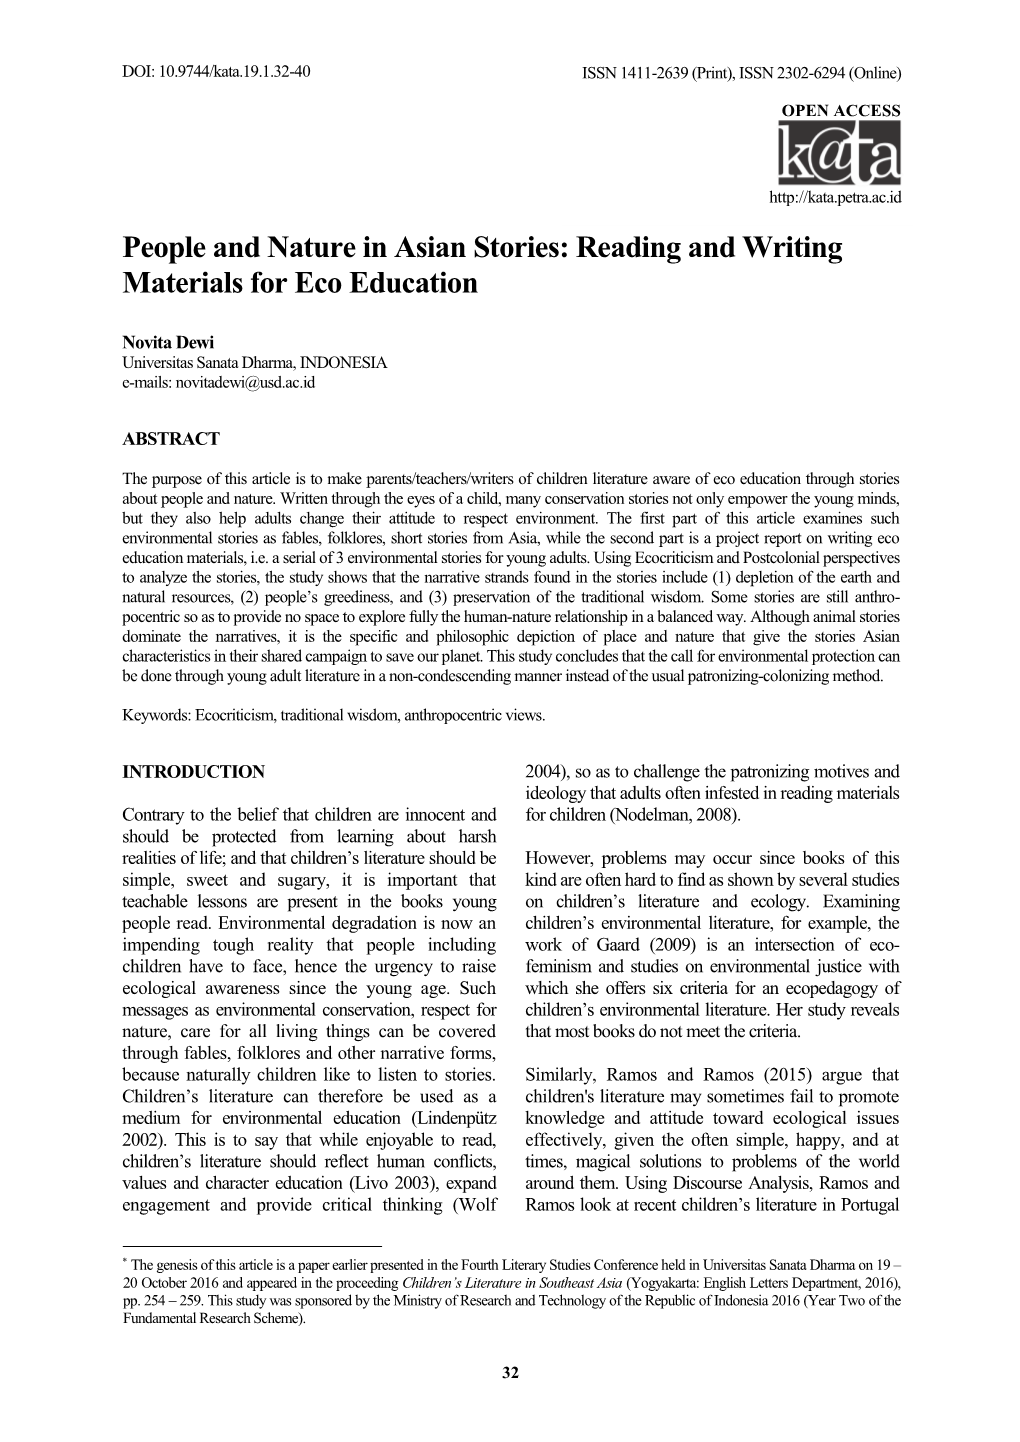 People and Nature in Asian Stories: Reading and Writing Materials for Eco Education